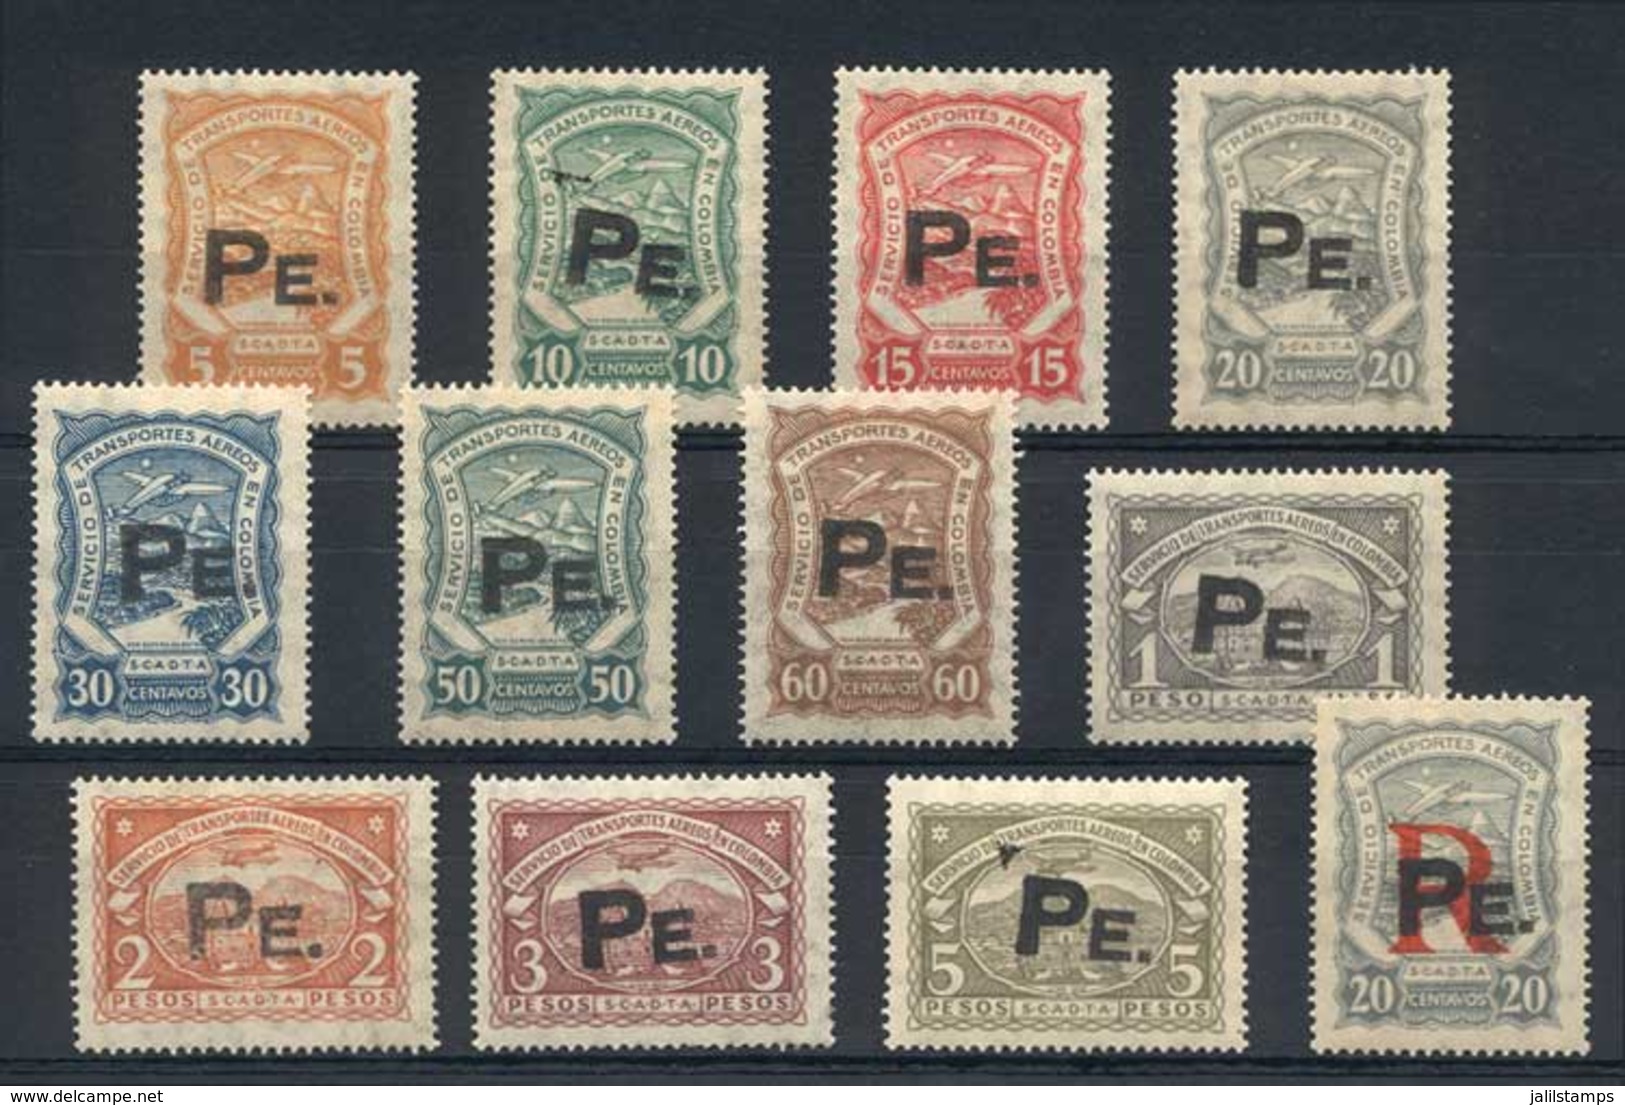 COLOMBIA: Scott CLPE1/CFLPE1, 1923 Complete Set Of 12 Values, Mint Never Hinged With Overprint In Intense Black, Excelle - Colombia